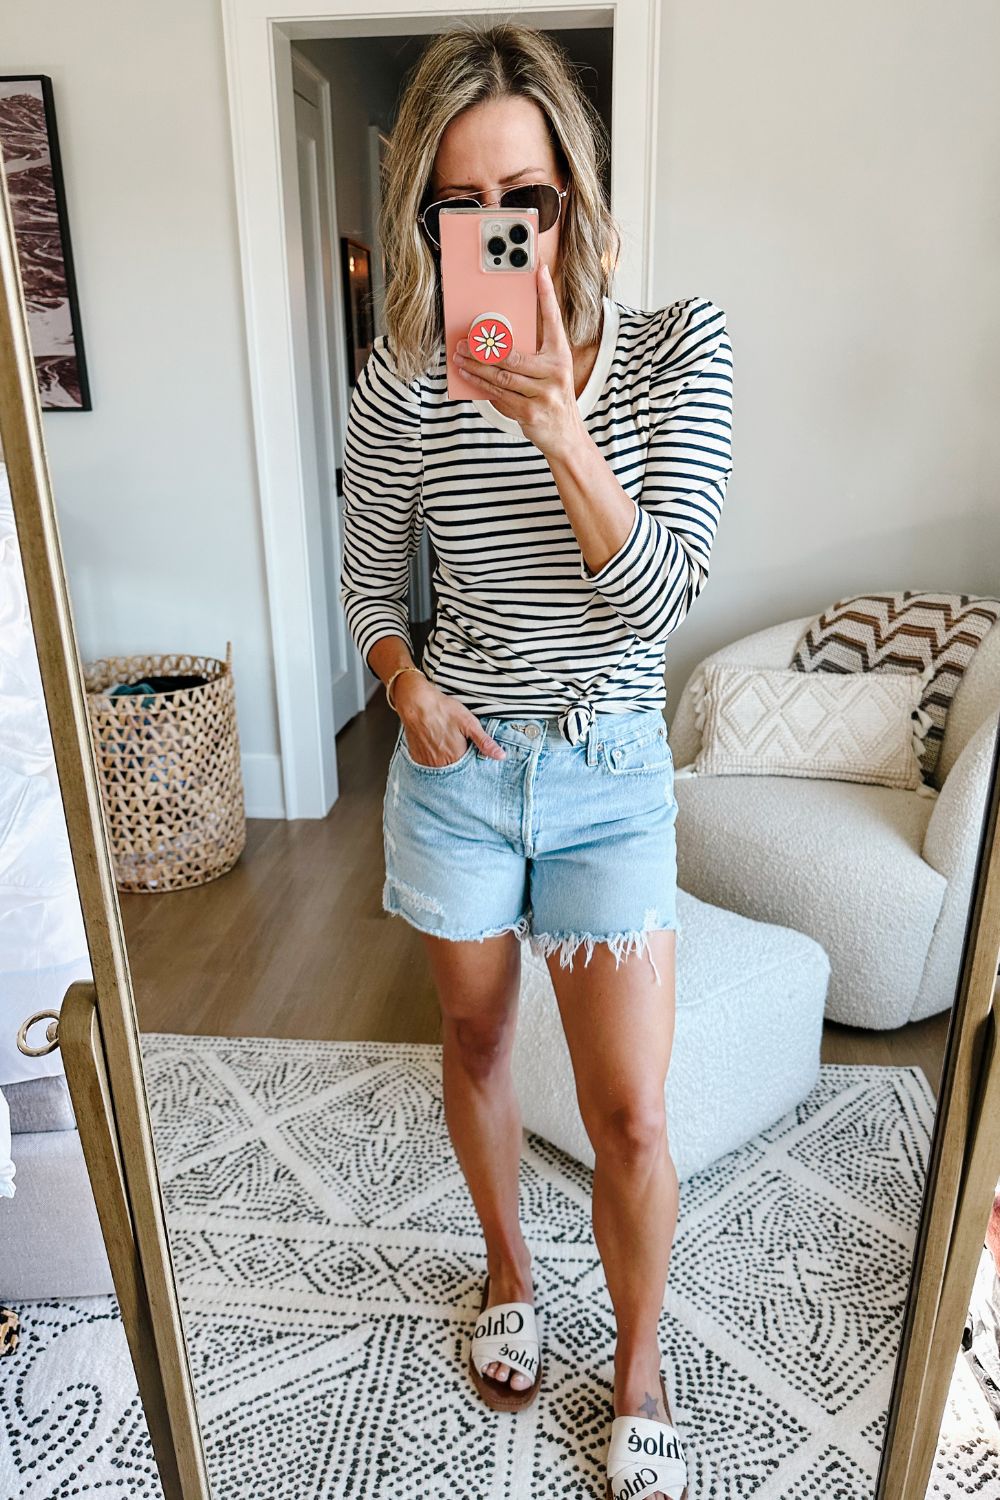 Suzanne wearing a striped puff sleeve top and denim shorts